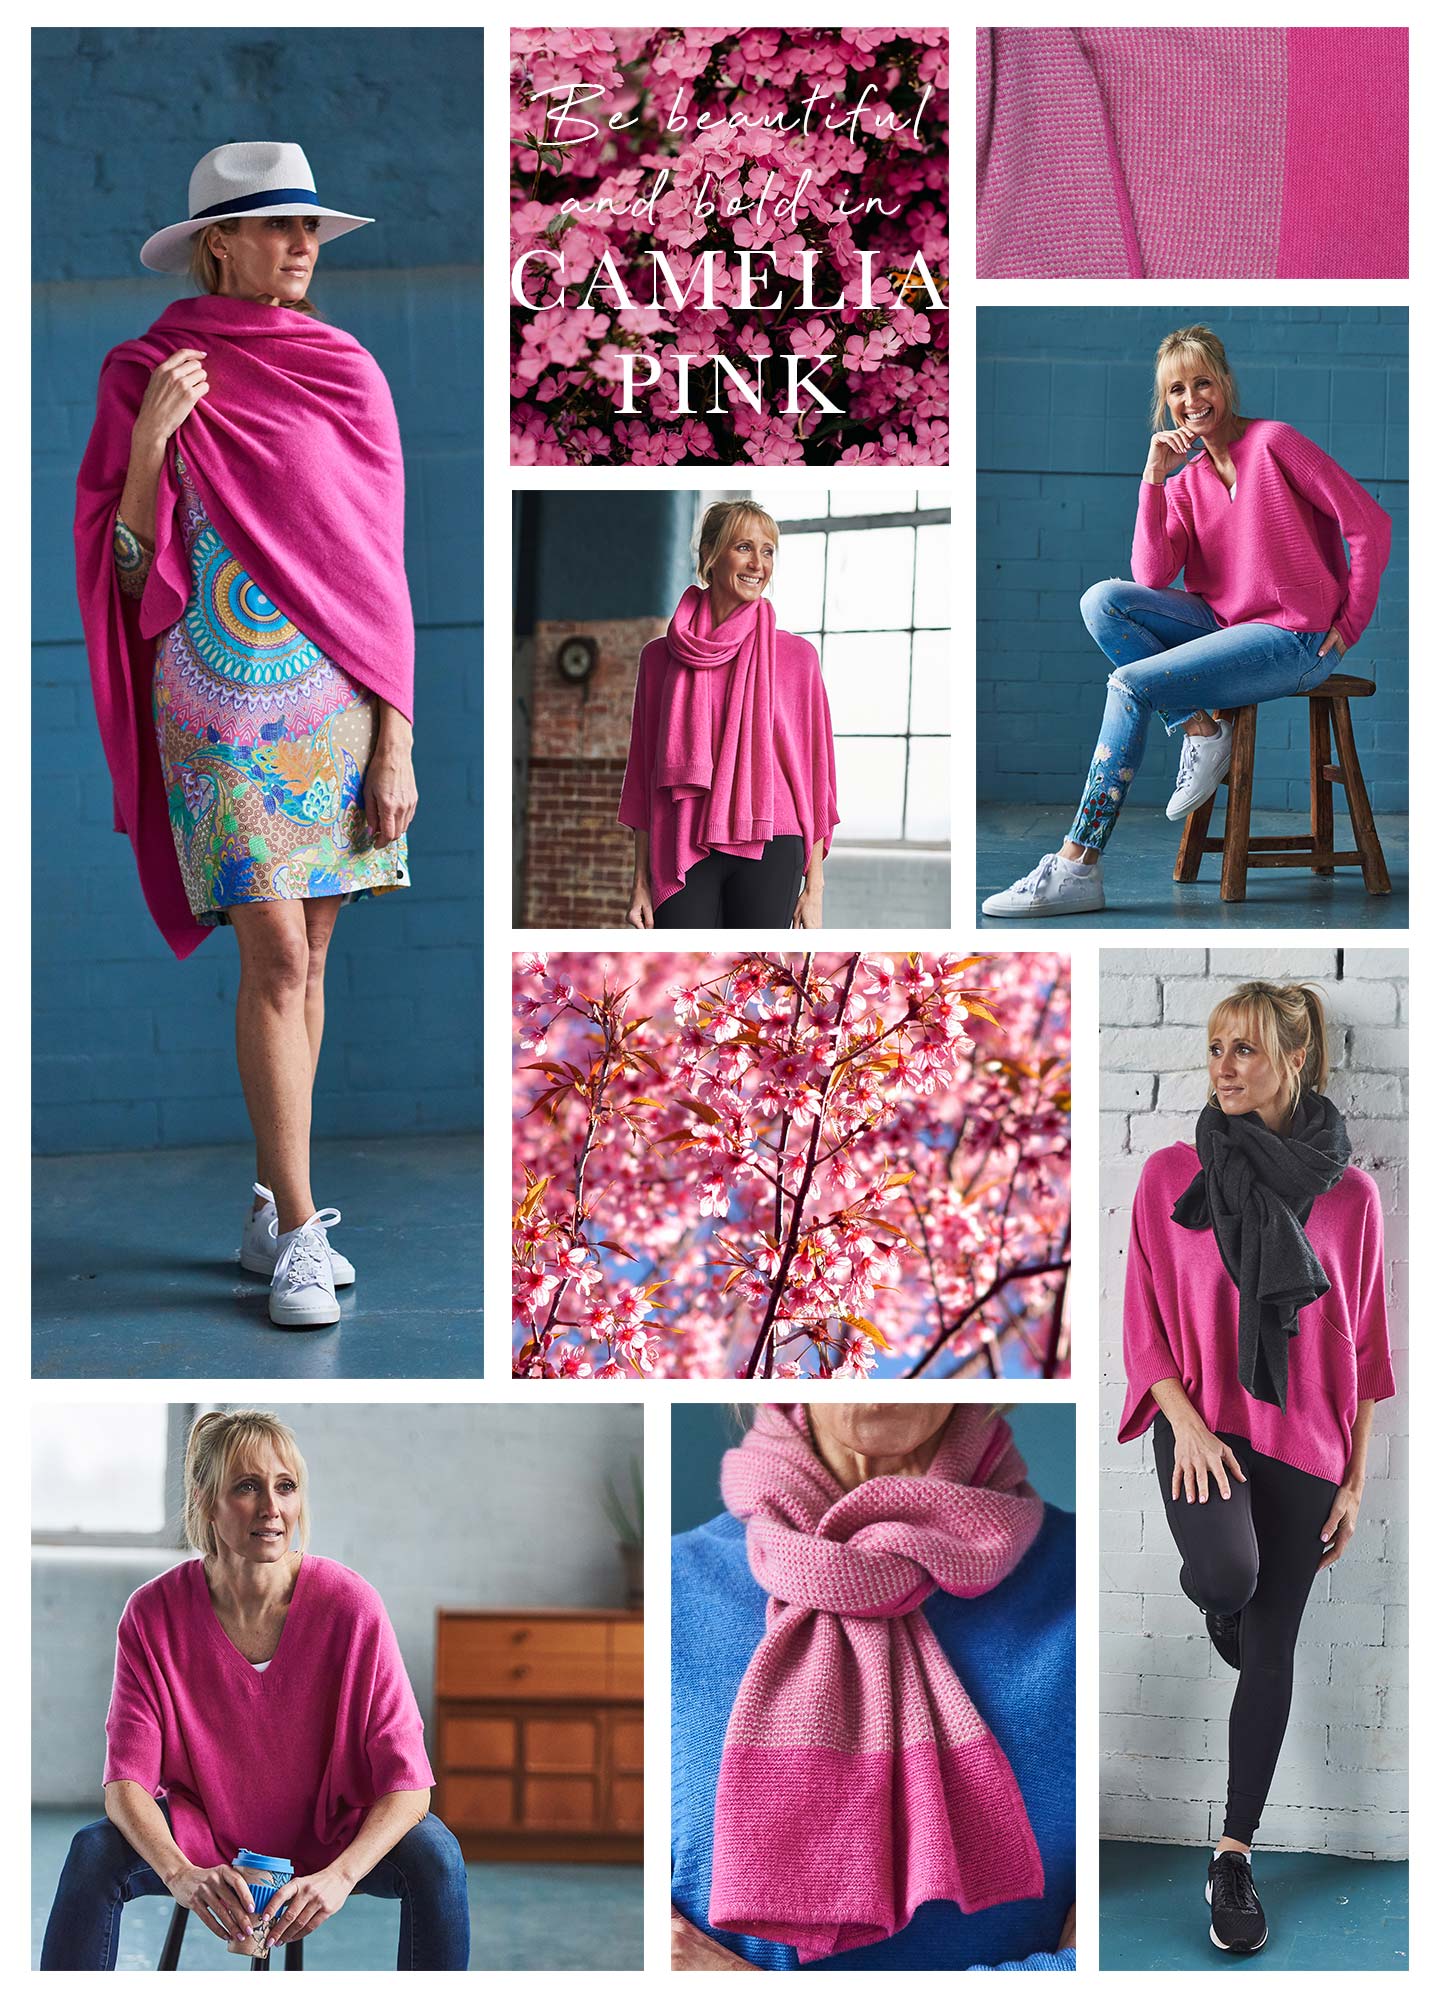 pink cashmere clothing images with pink blossom and textures